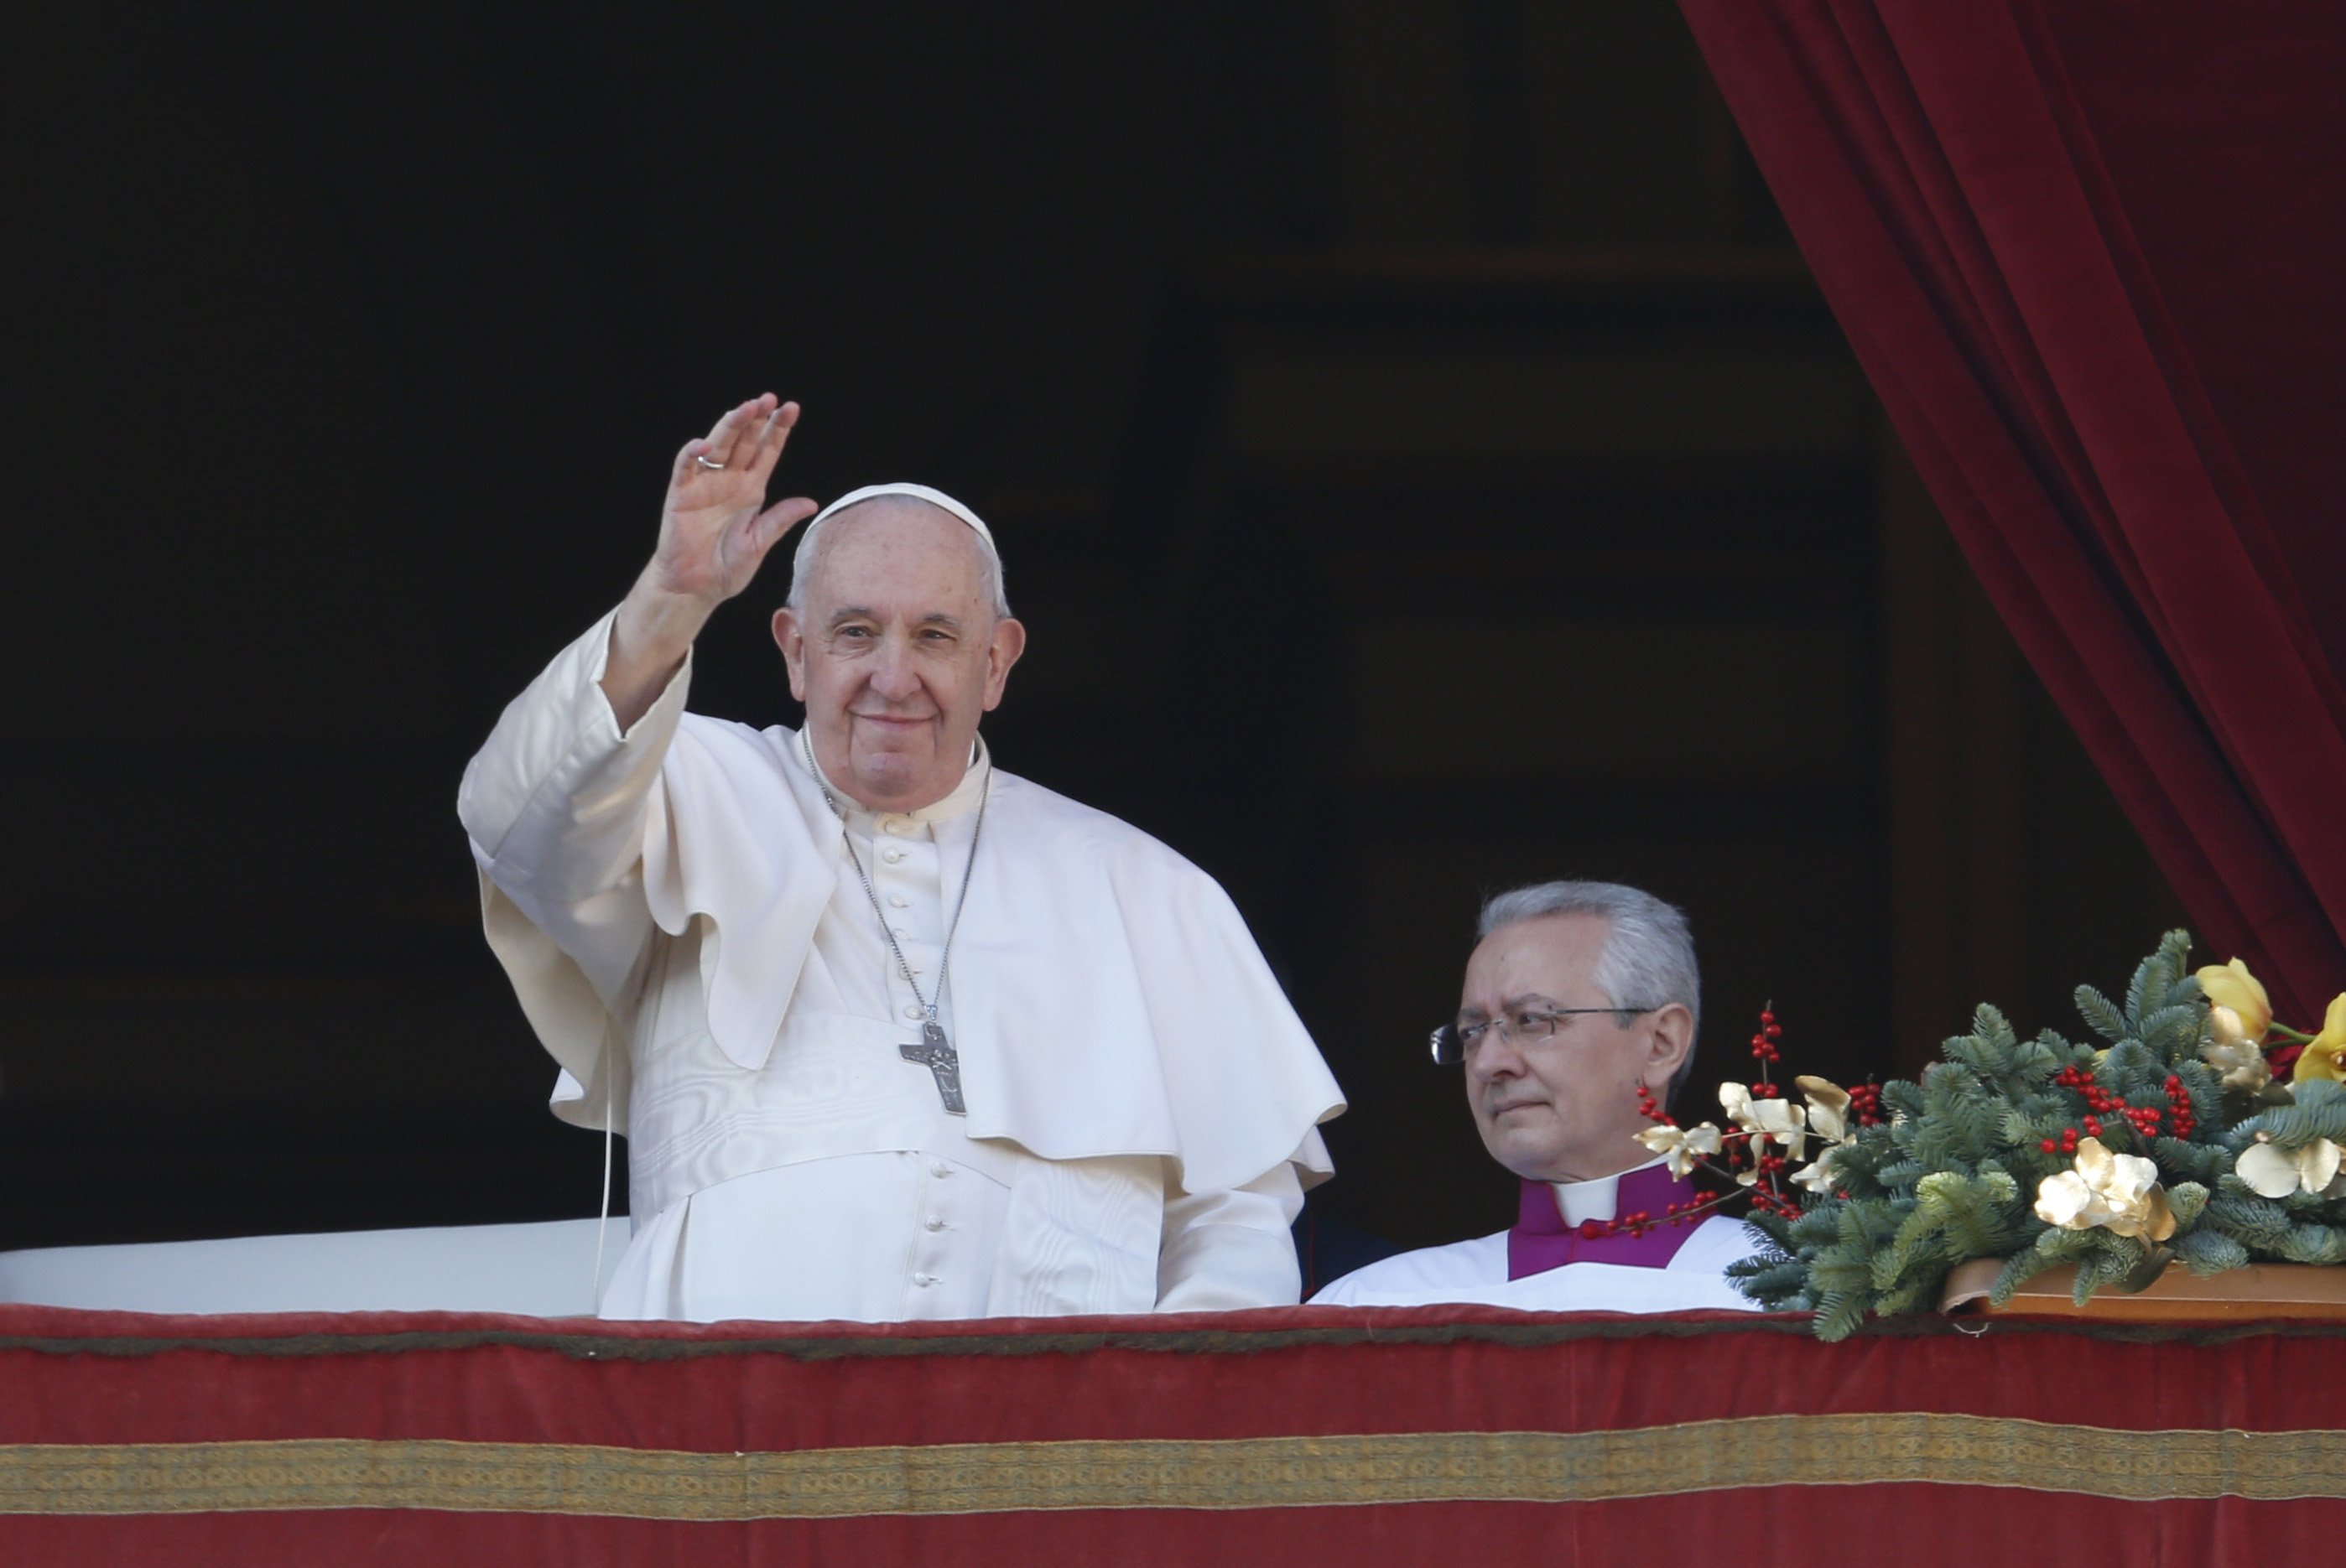 Pope Francis greets the crowd as he arrives to deliver his Christmas message and his blessing "urbi et orbi" (to the city and the world) from the central balcony of St. Peter's Basilica at the Vatican Dec. 25, 2022.